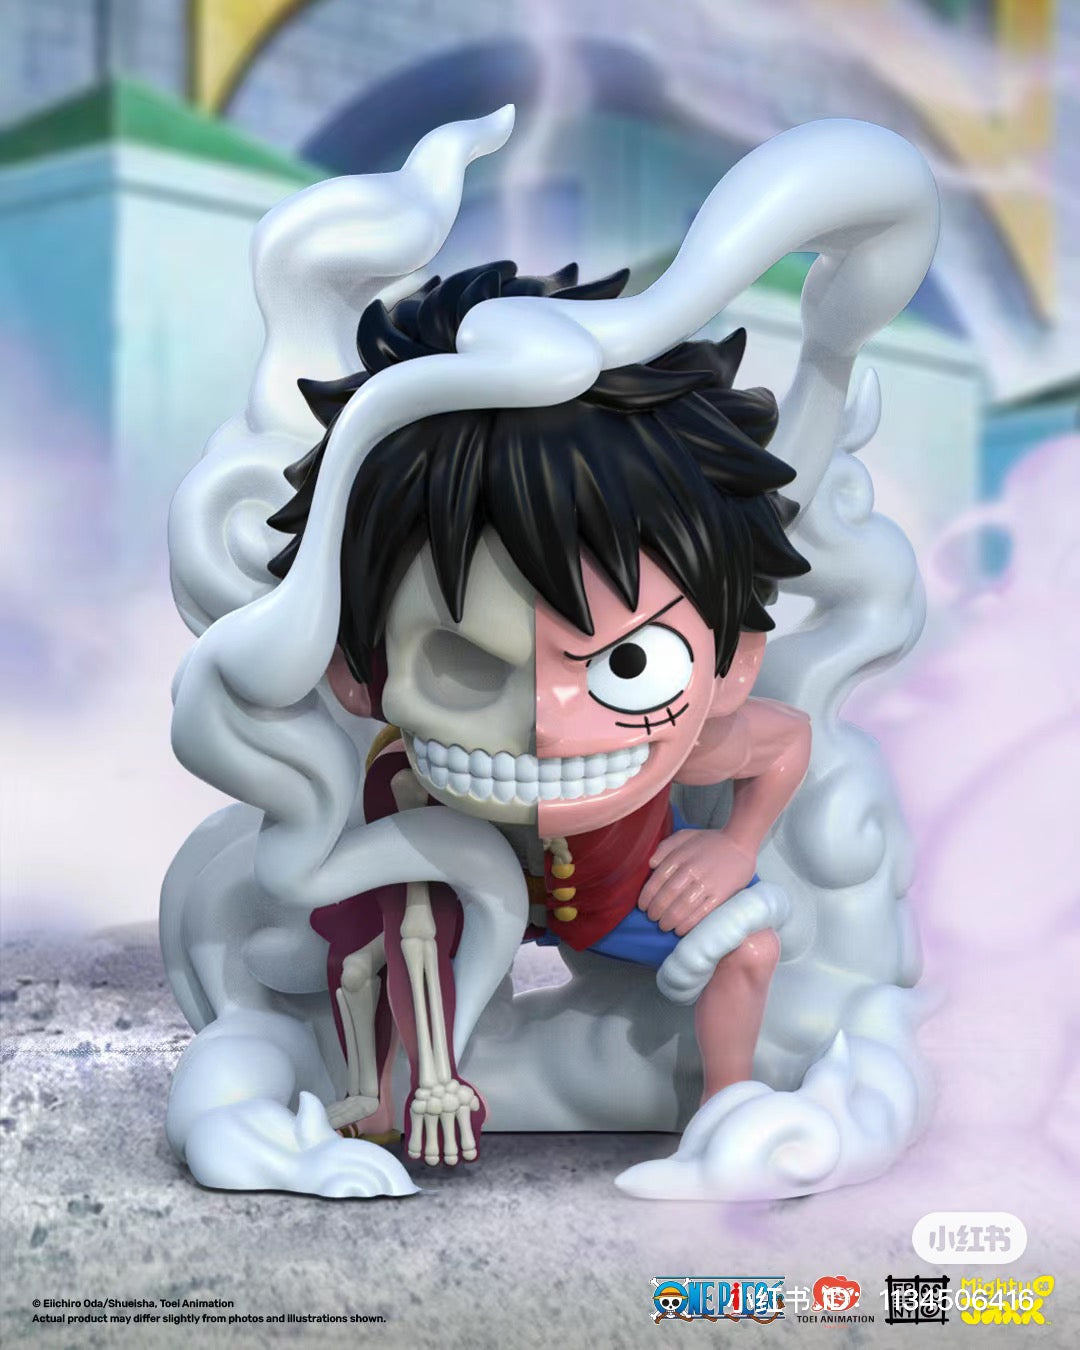 FREENY'S HIDDEN DISSECTIBLES: ONE PIECE (LUFFY’S GEARS EDITION)